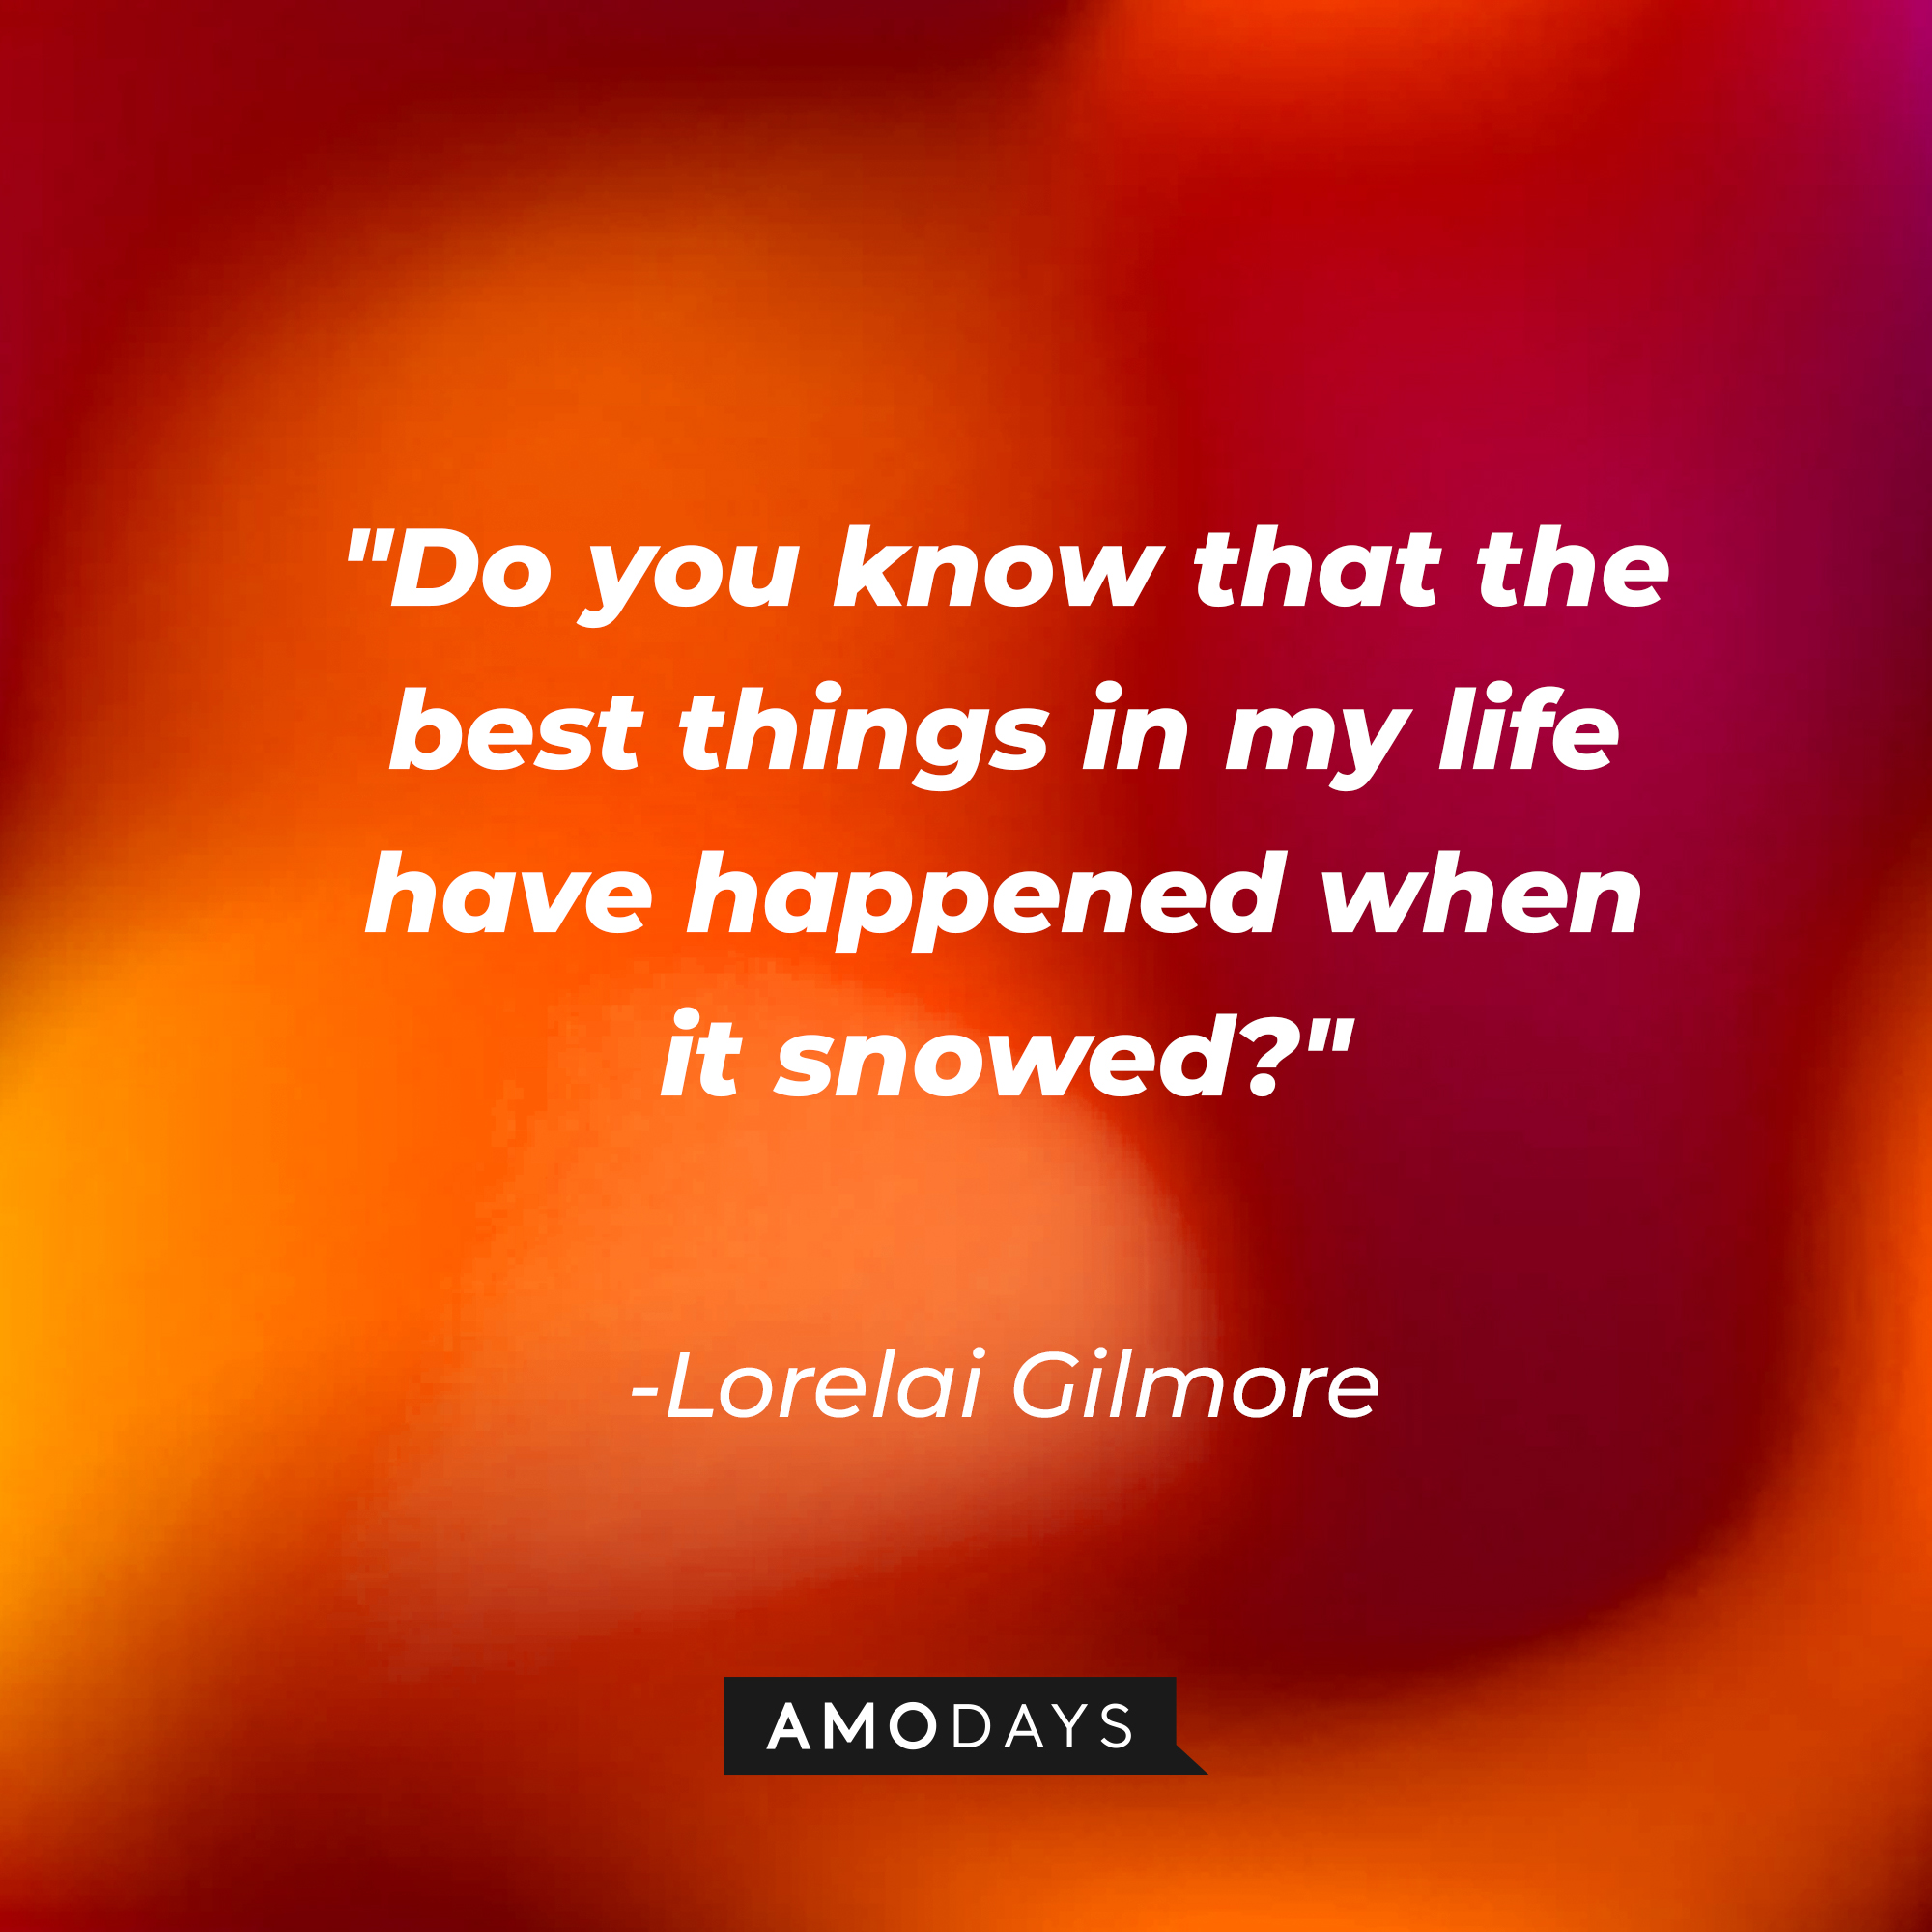 Lorelai Gilmore's quote: "Do you know that the best things in my life have happened when it snowed?" | Source: AmoDays